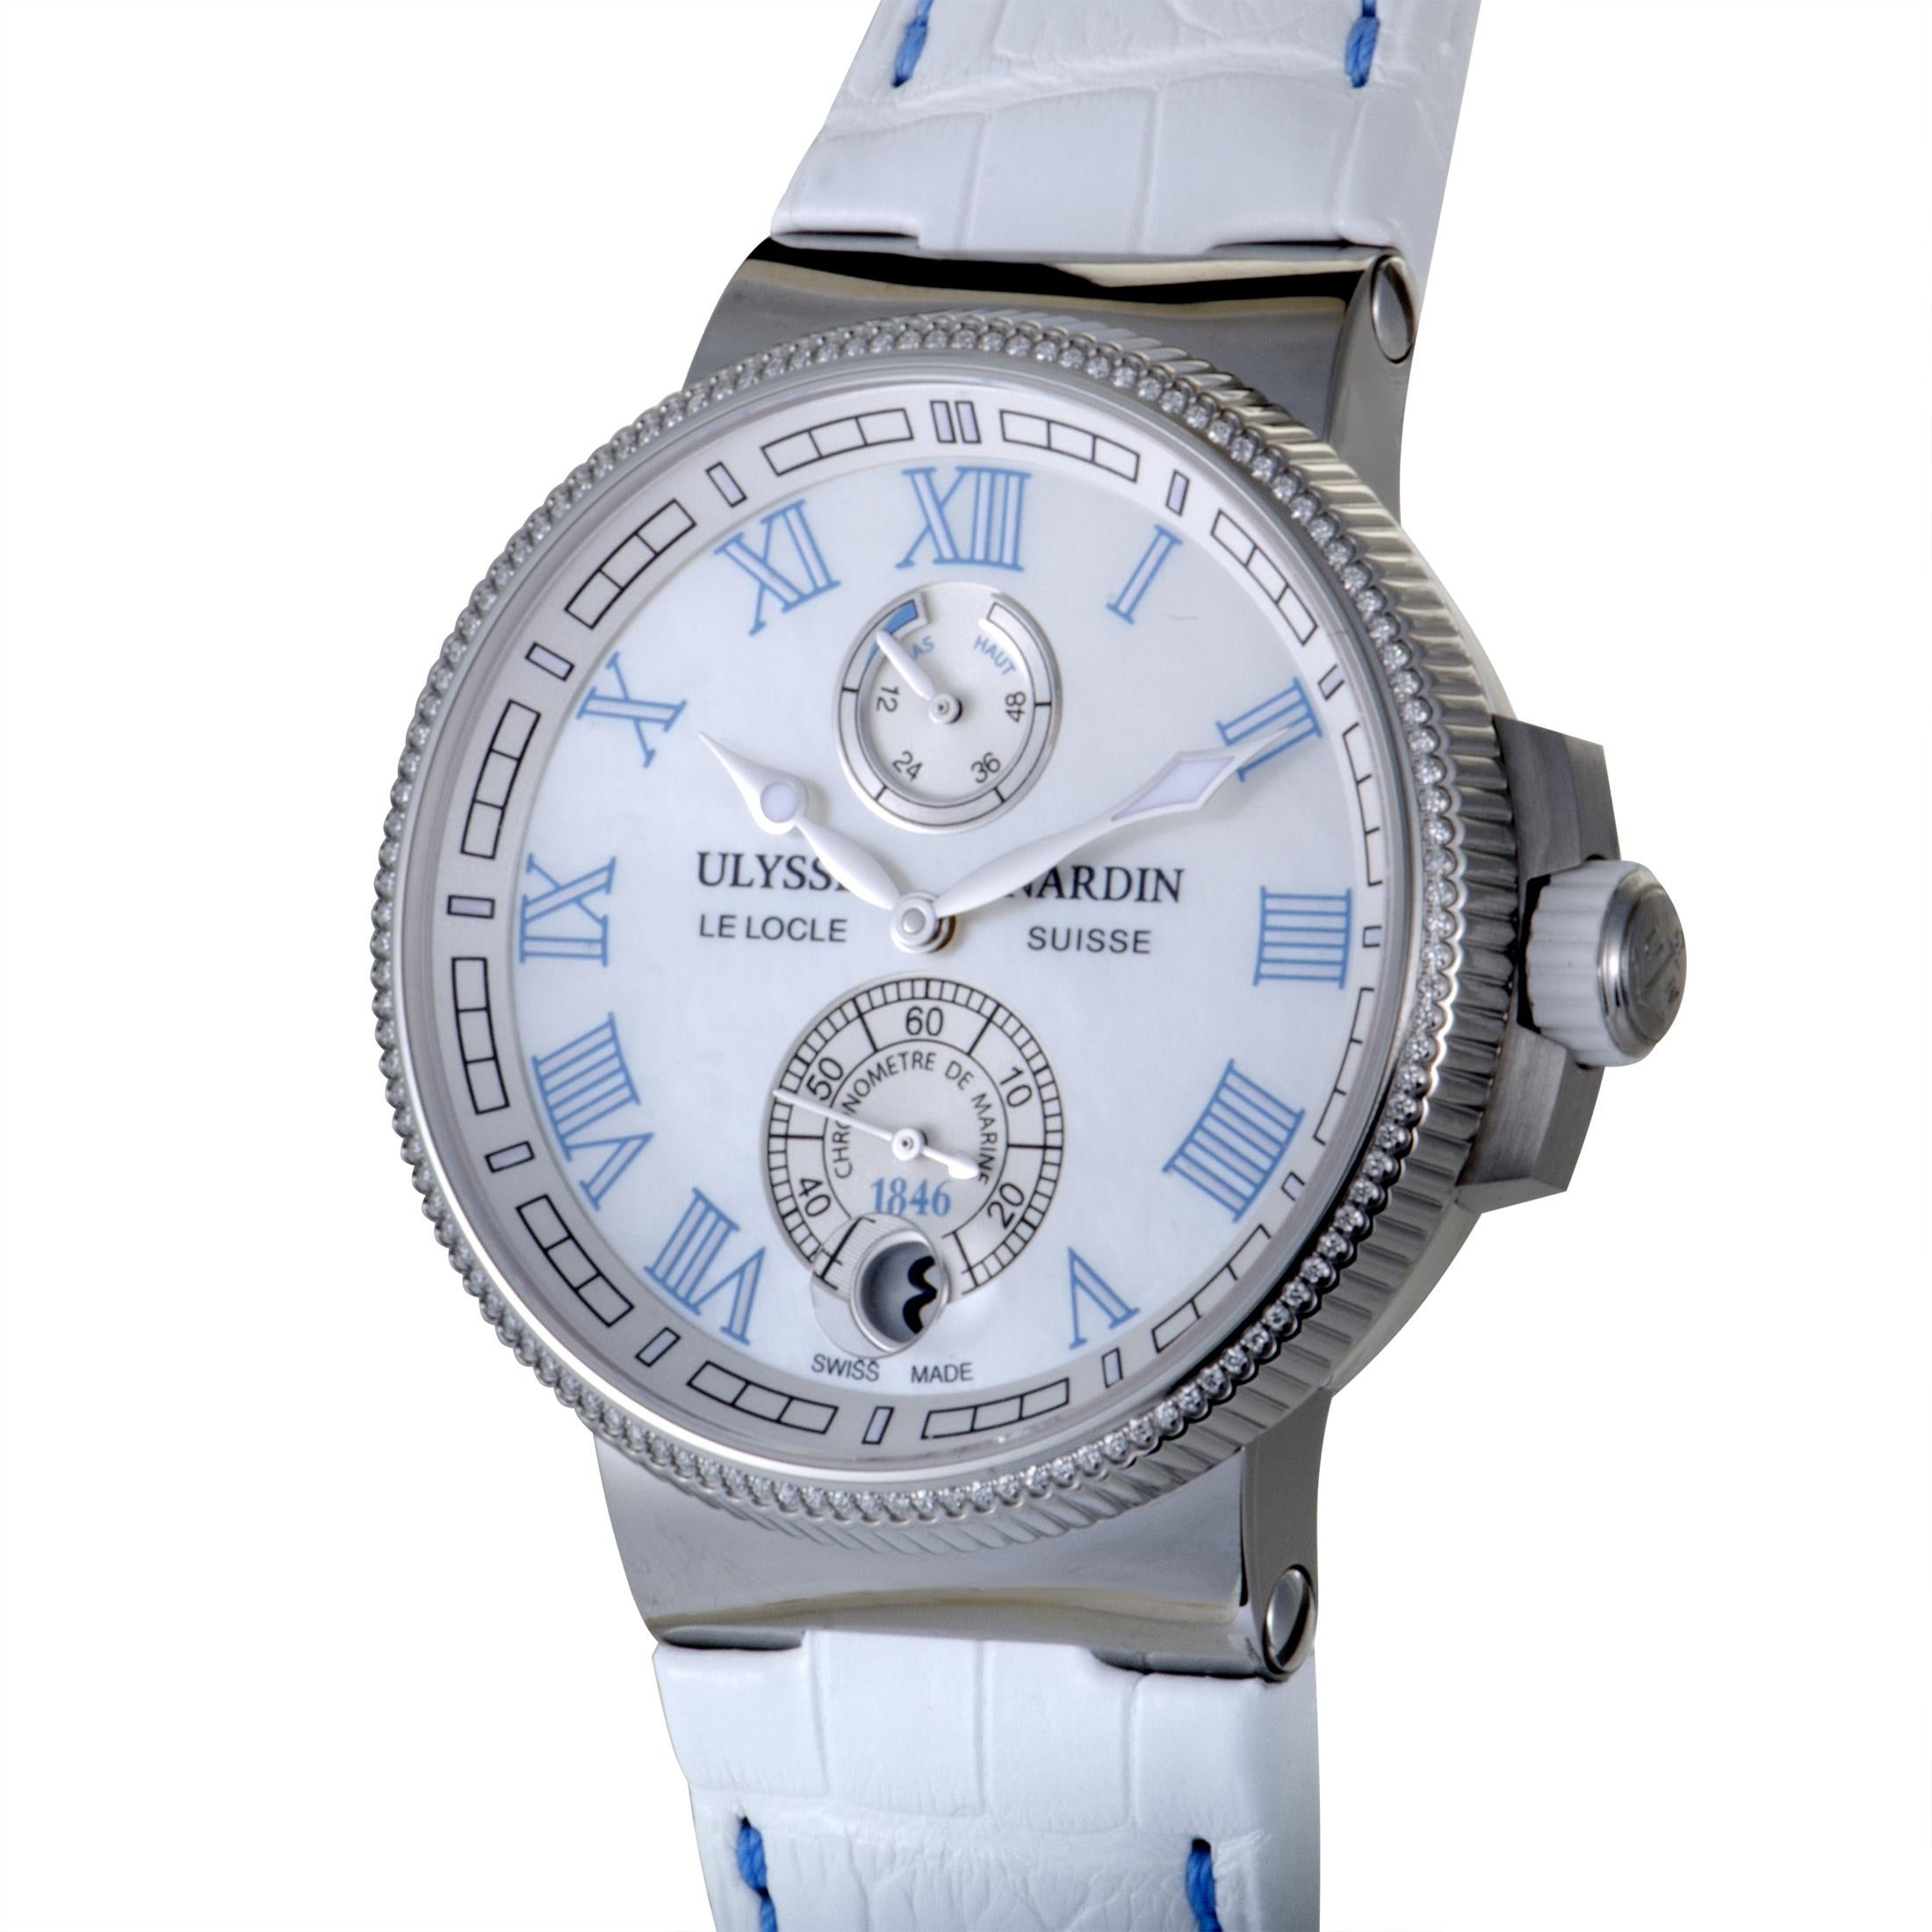 Wonderful symmetry, delightful harmony, and tender overall tone produce a gorgeous sense of graceful femininity in this charming timepiece from Ulysse Nardin which offers the brand’s renowned technical quality in an aesthetically refined setting.